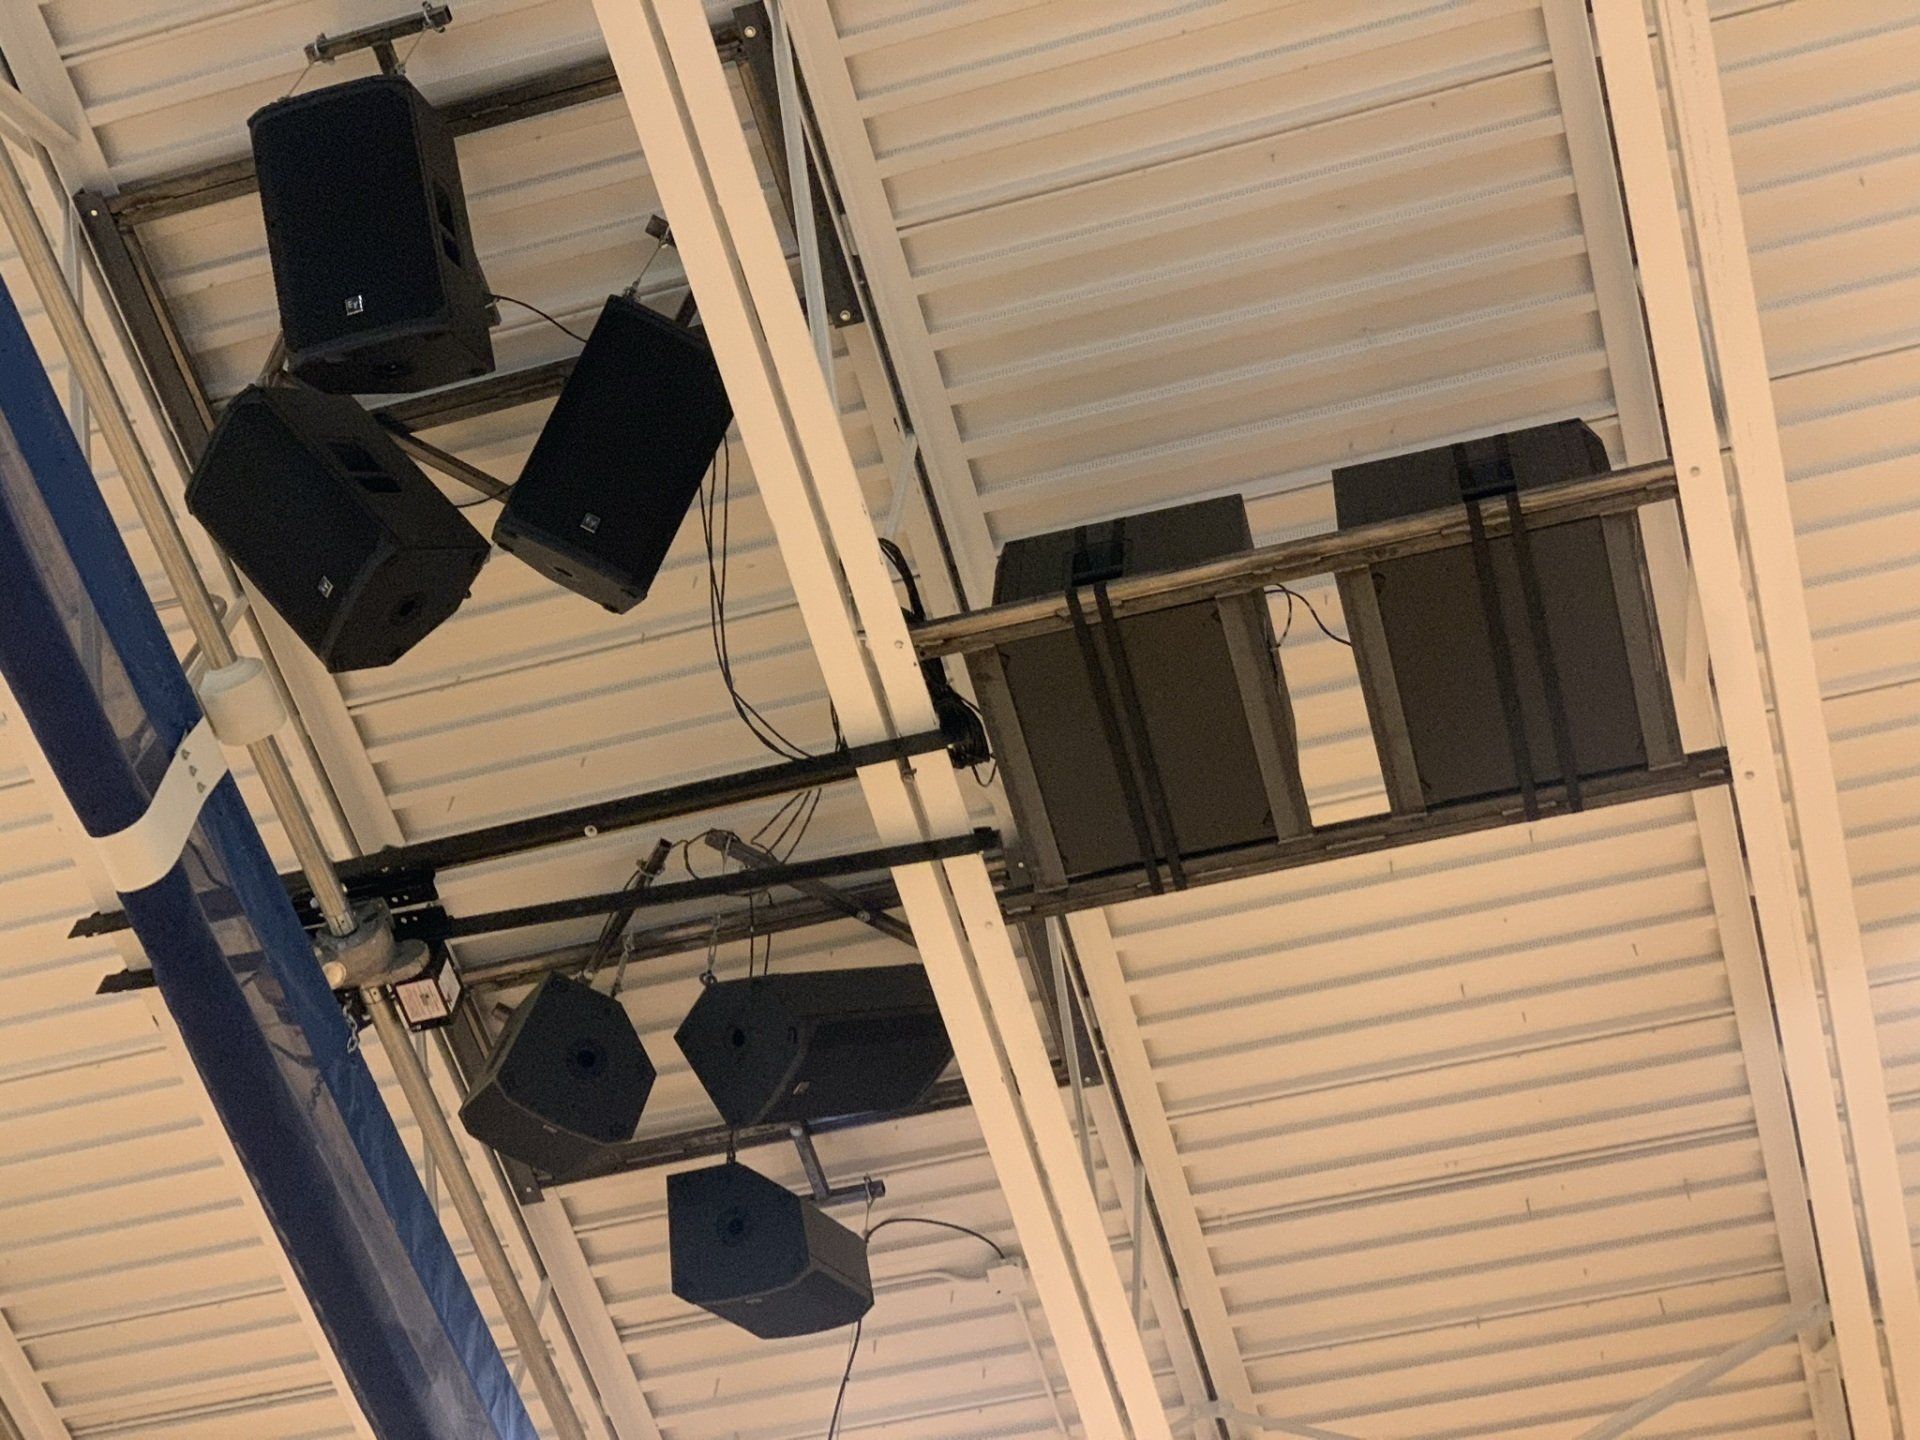 A bunch of speakers are hanging from the ceiling of a building